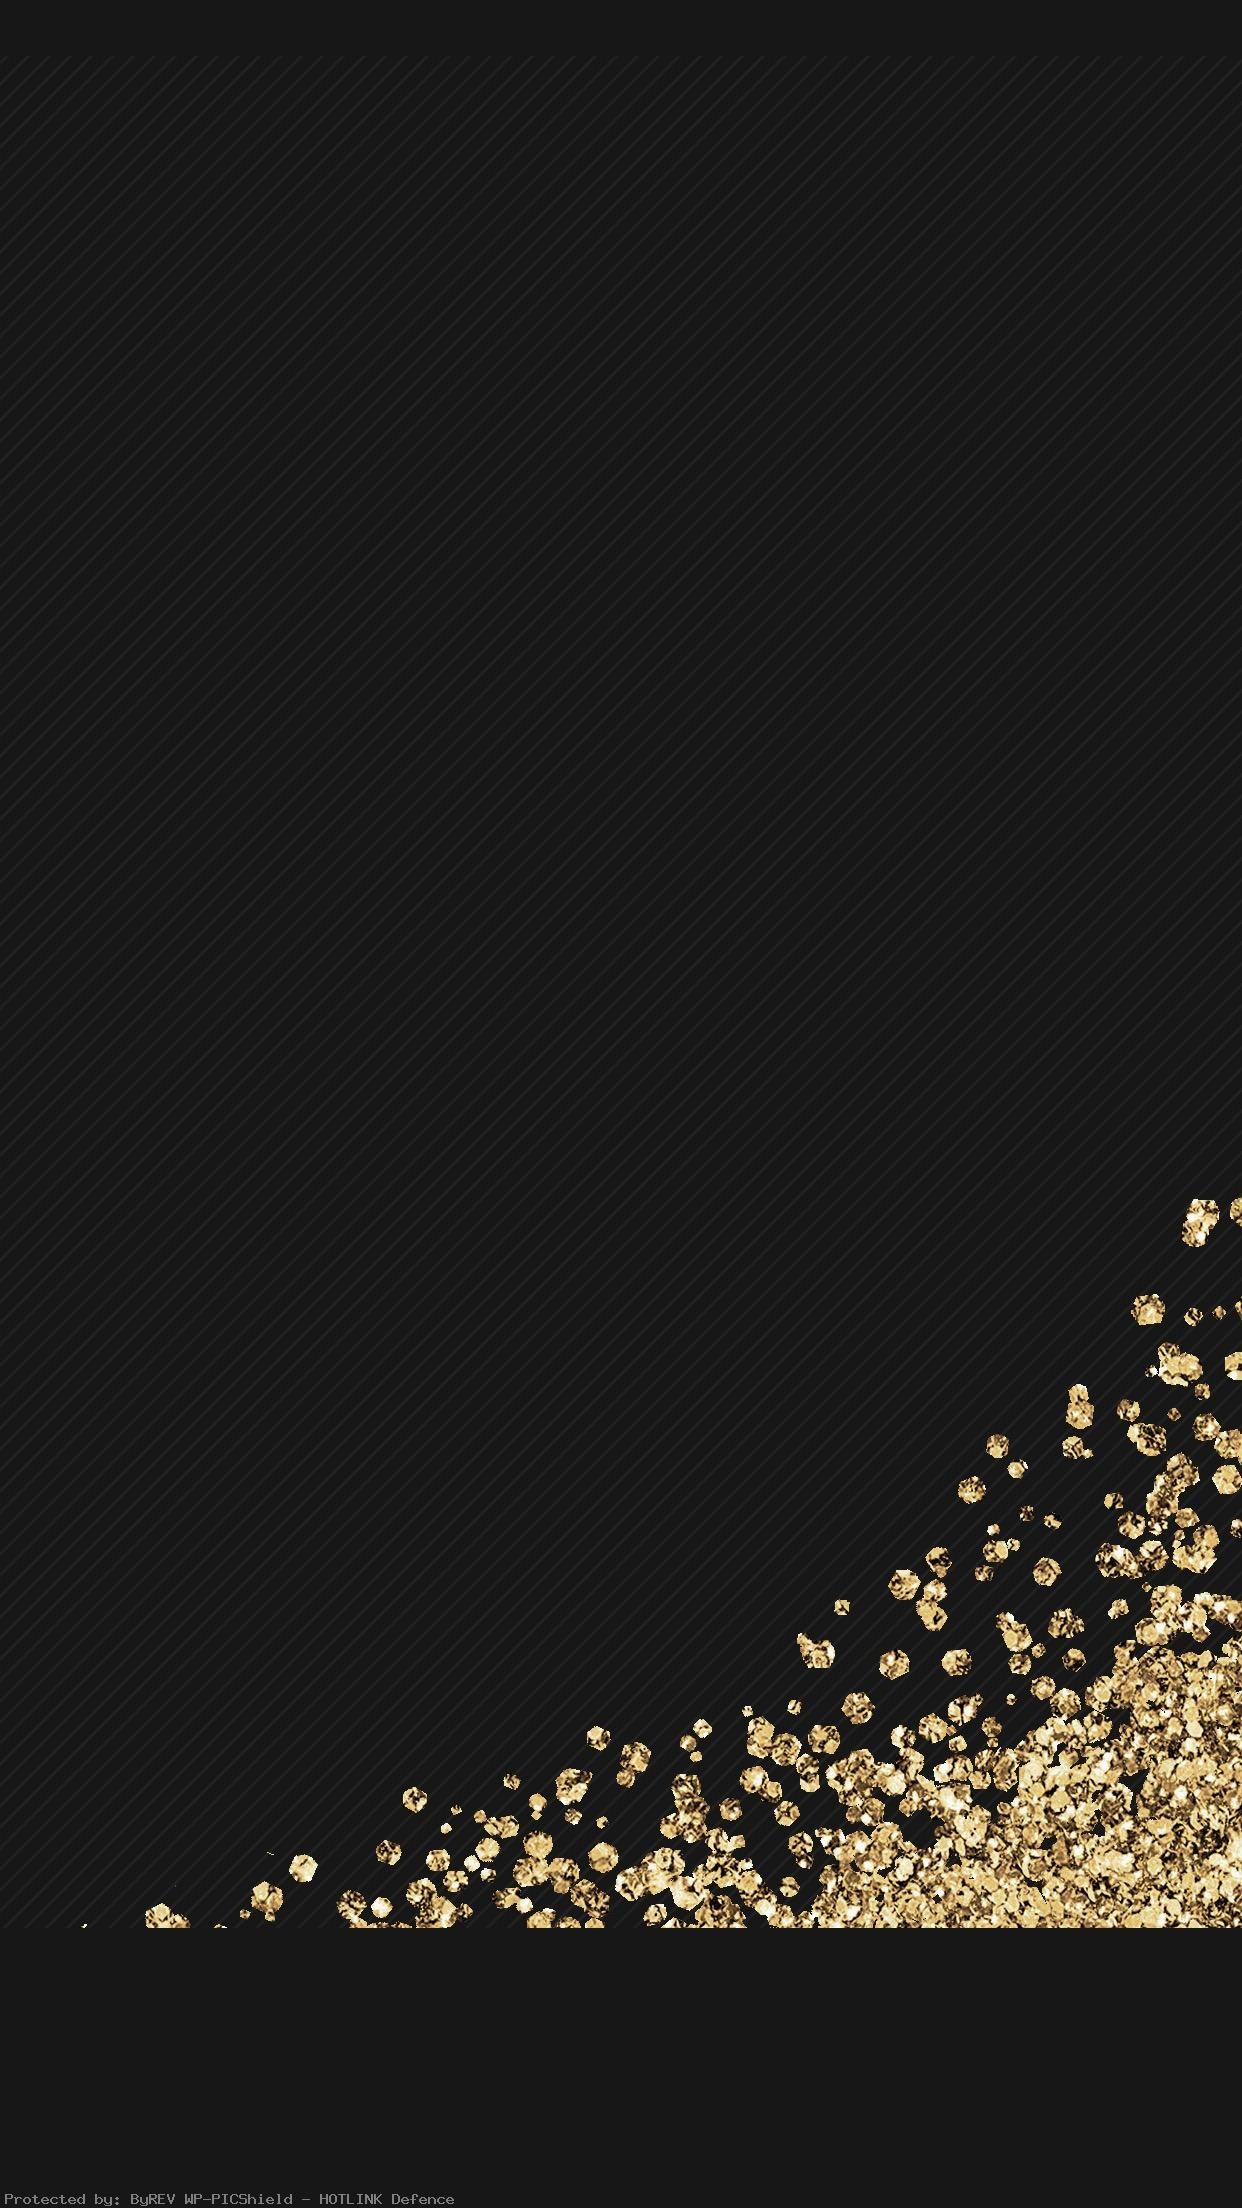 Black and Gold Glitter iPhone Background